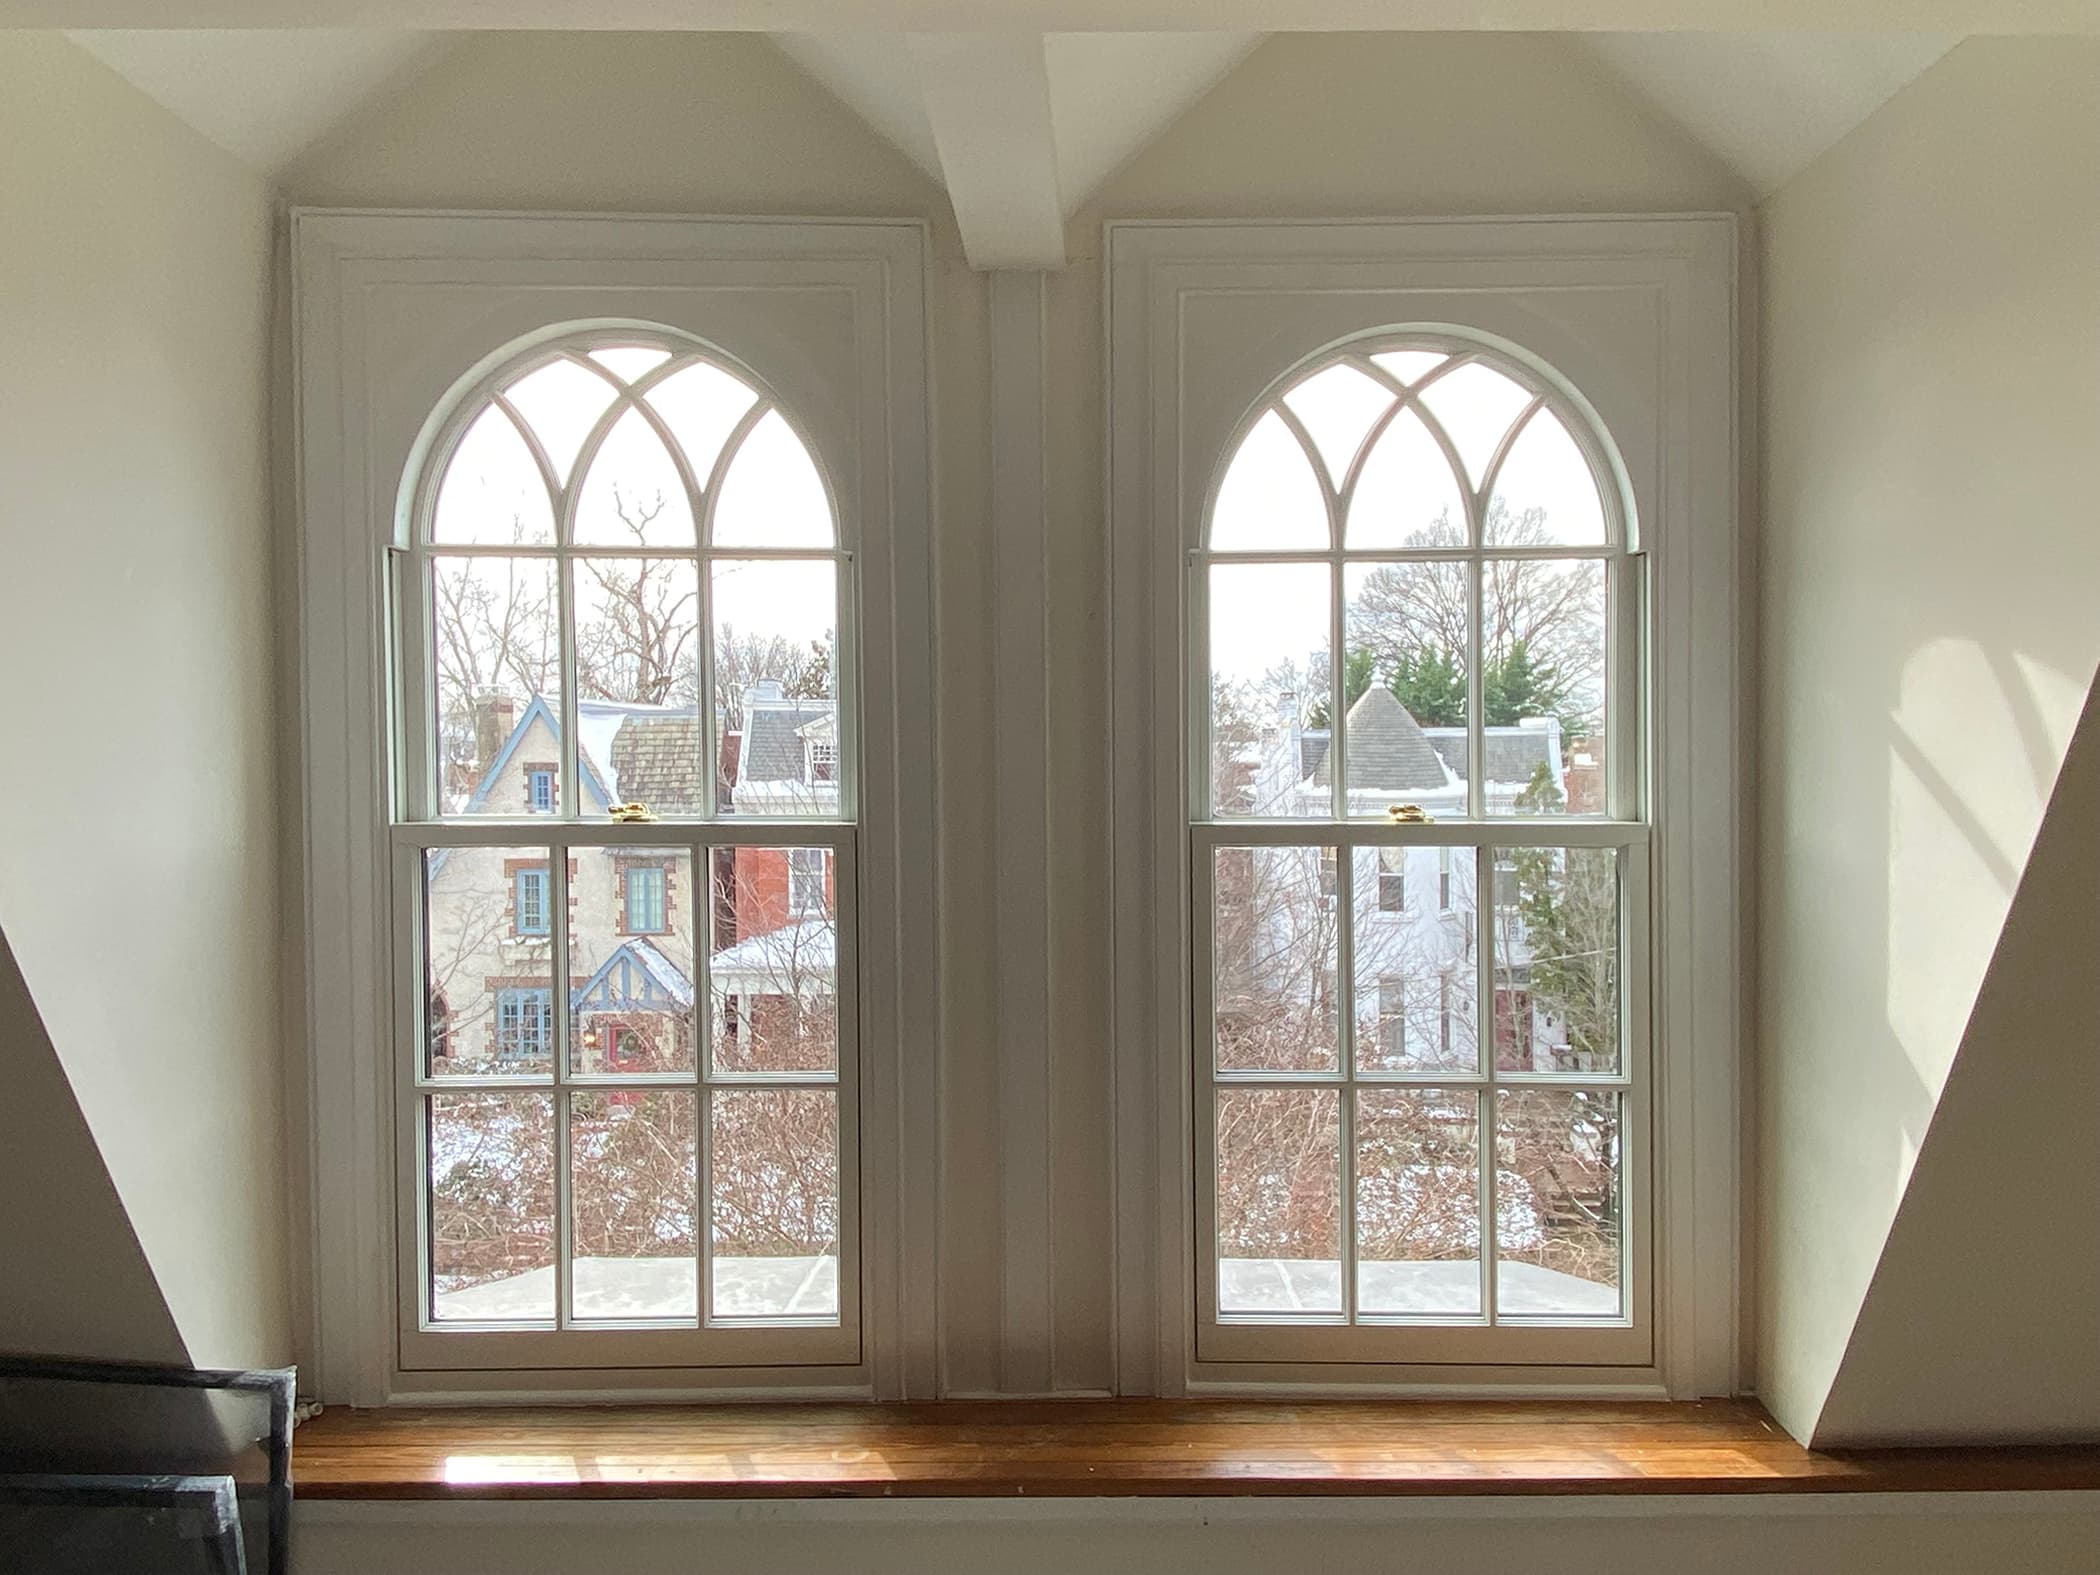 Interior of arched windows with gothic style grilles and custom framework